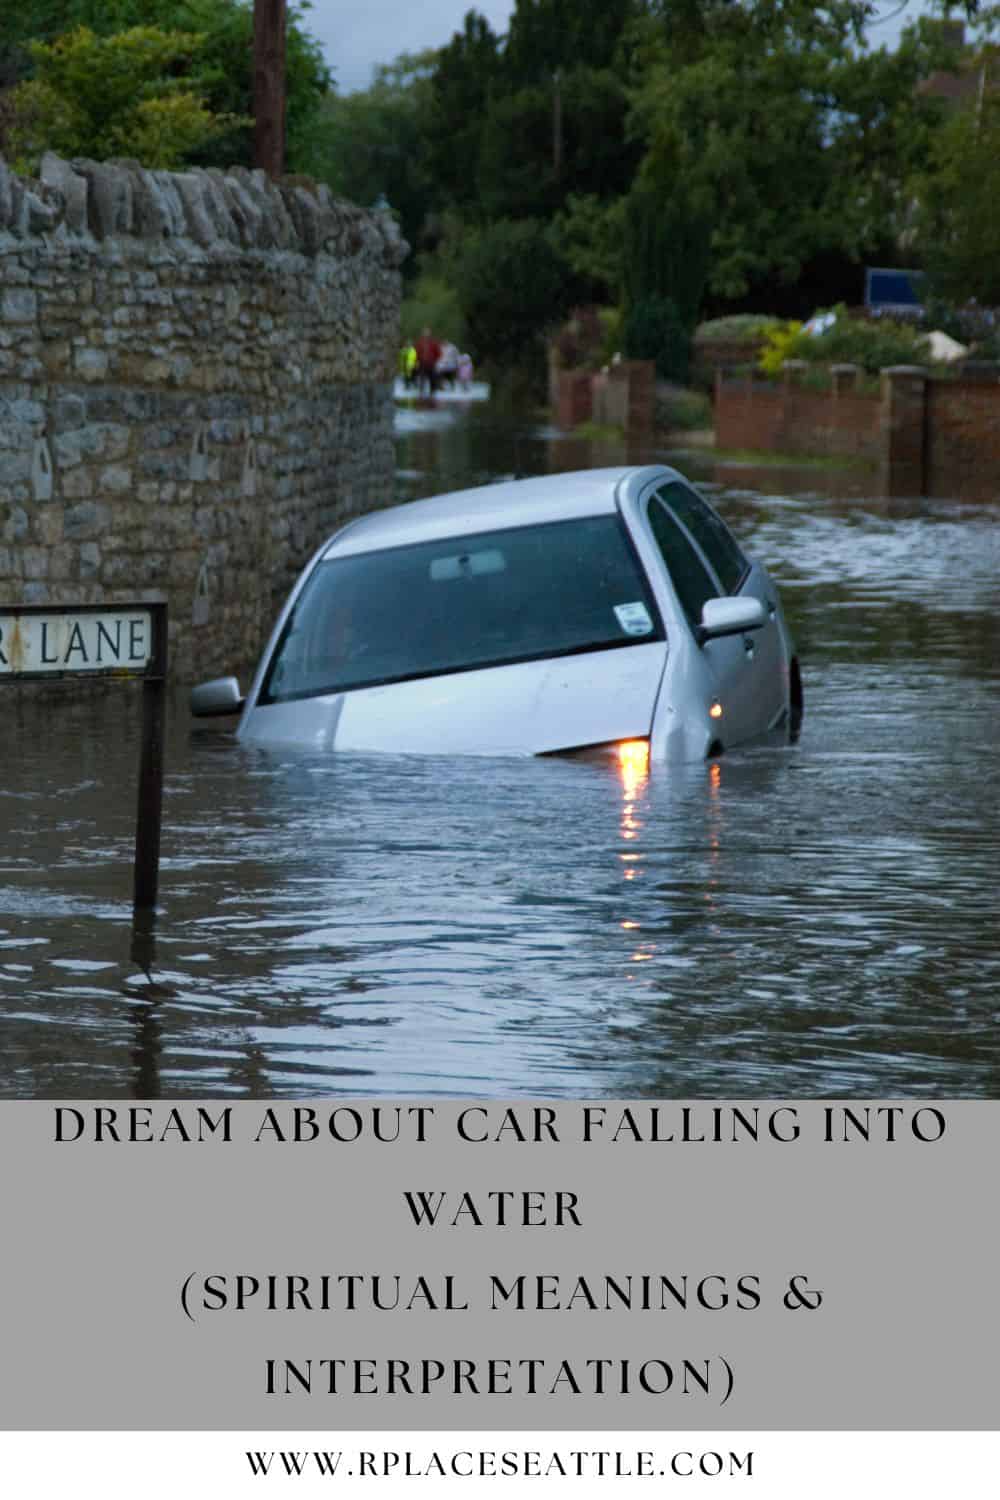 Dream About Car Falling Into Water (Spiritual Meanings & Interpretation)